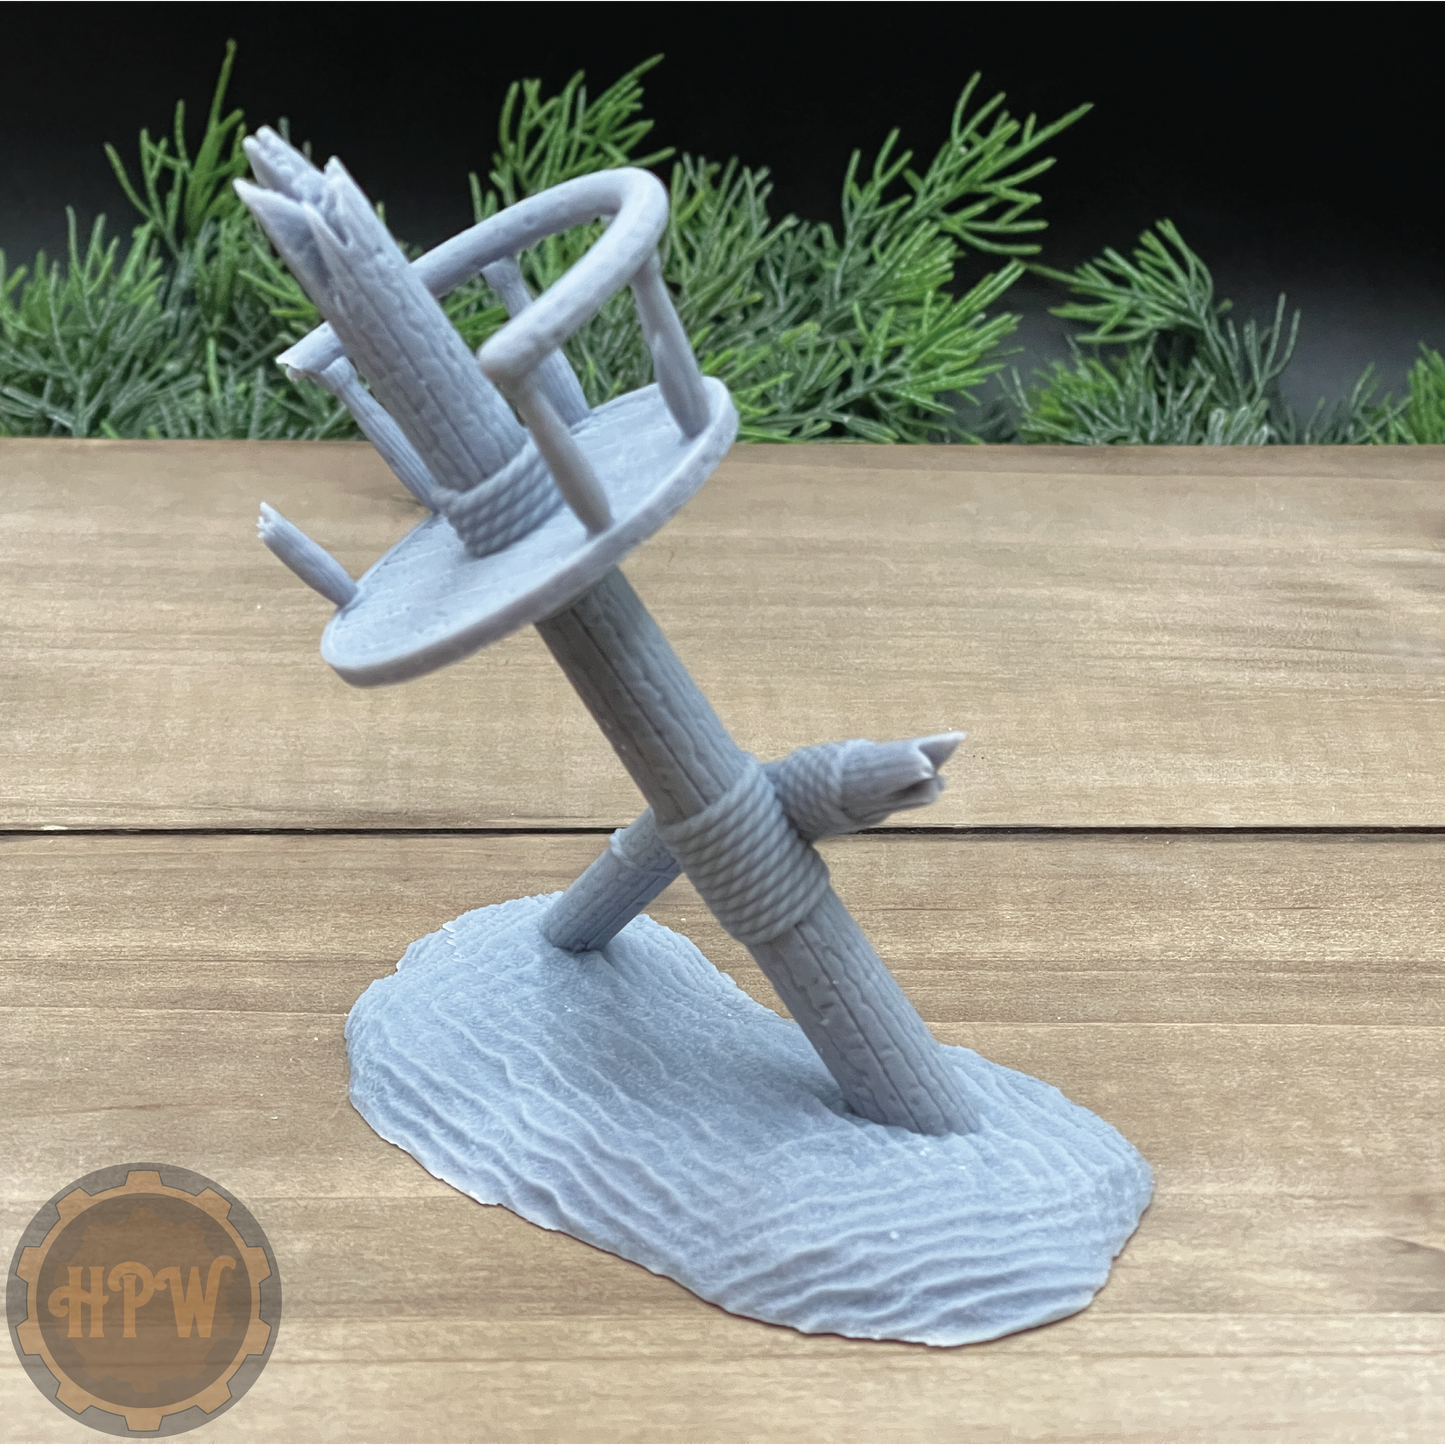 Crow's Nest Wreckage | Shattered Mast | Miniature Gaming Terrain Kit | GameScape3D | Sea Stack Cove